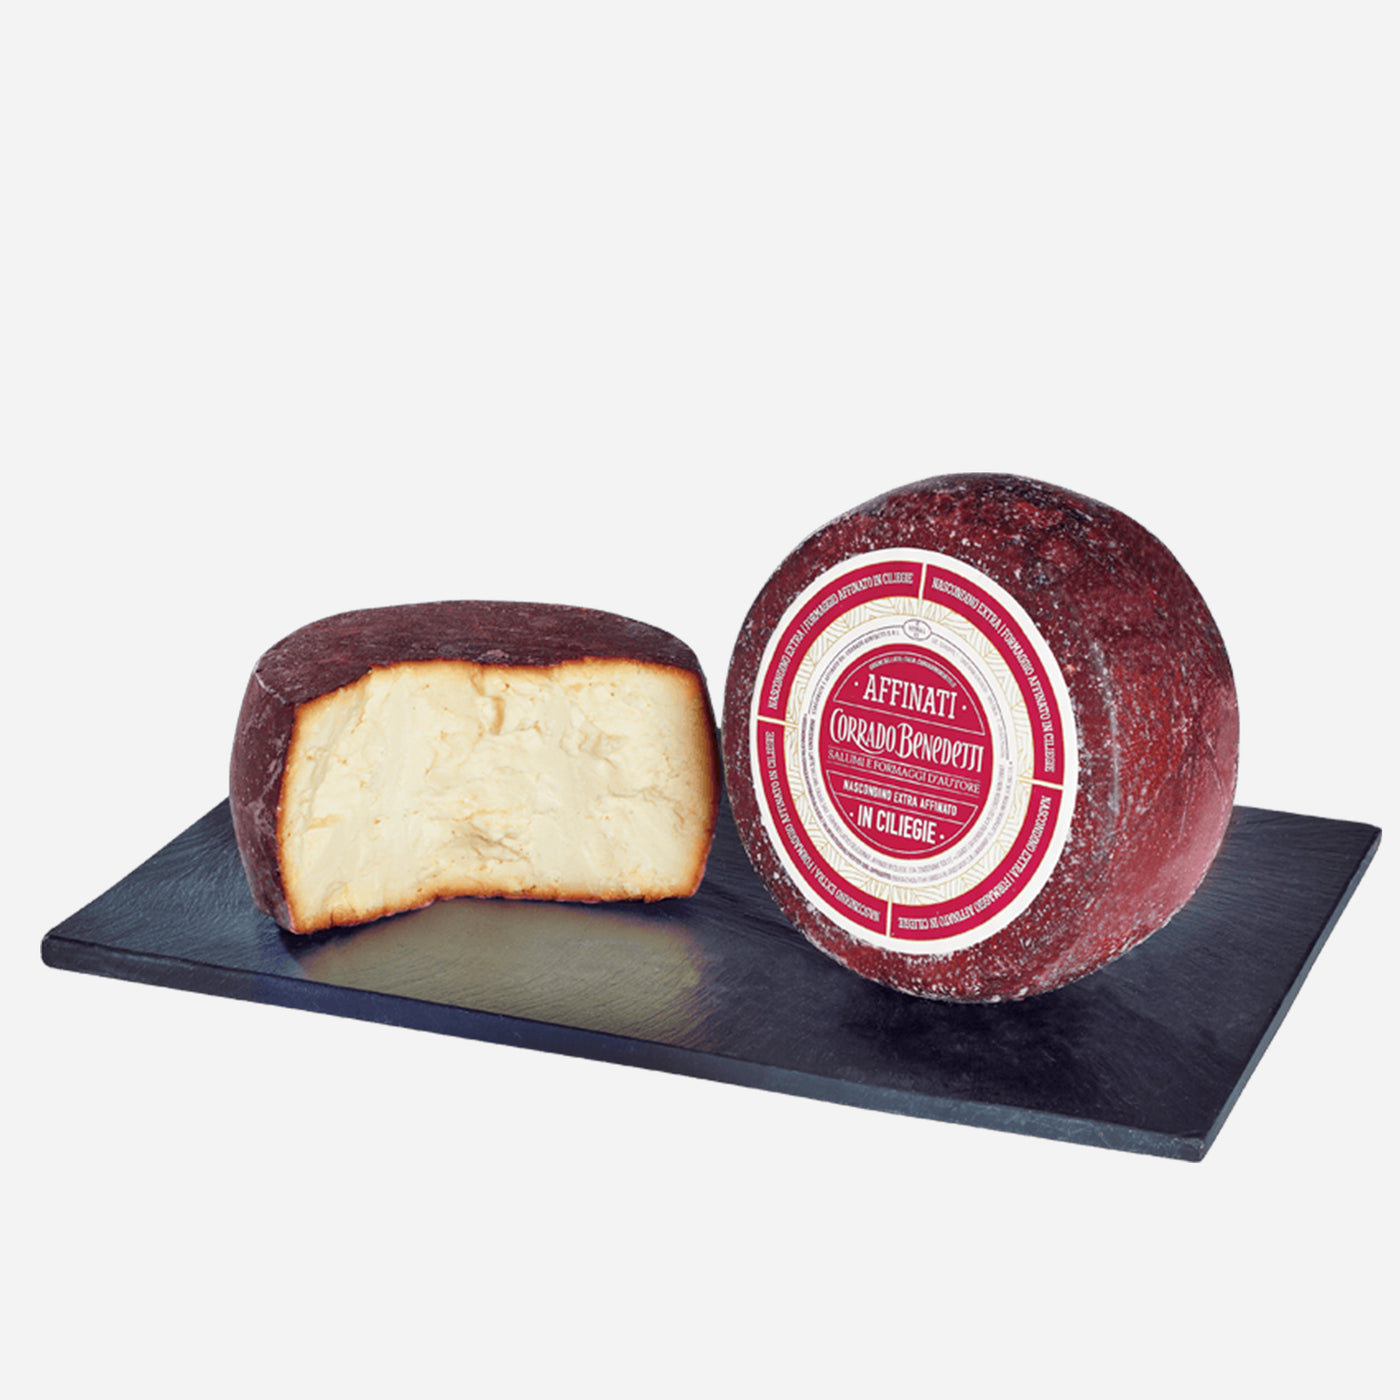 Cheese Aged in Cherries 1.1 lb